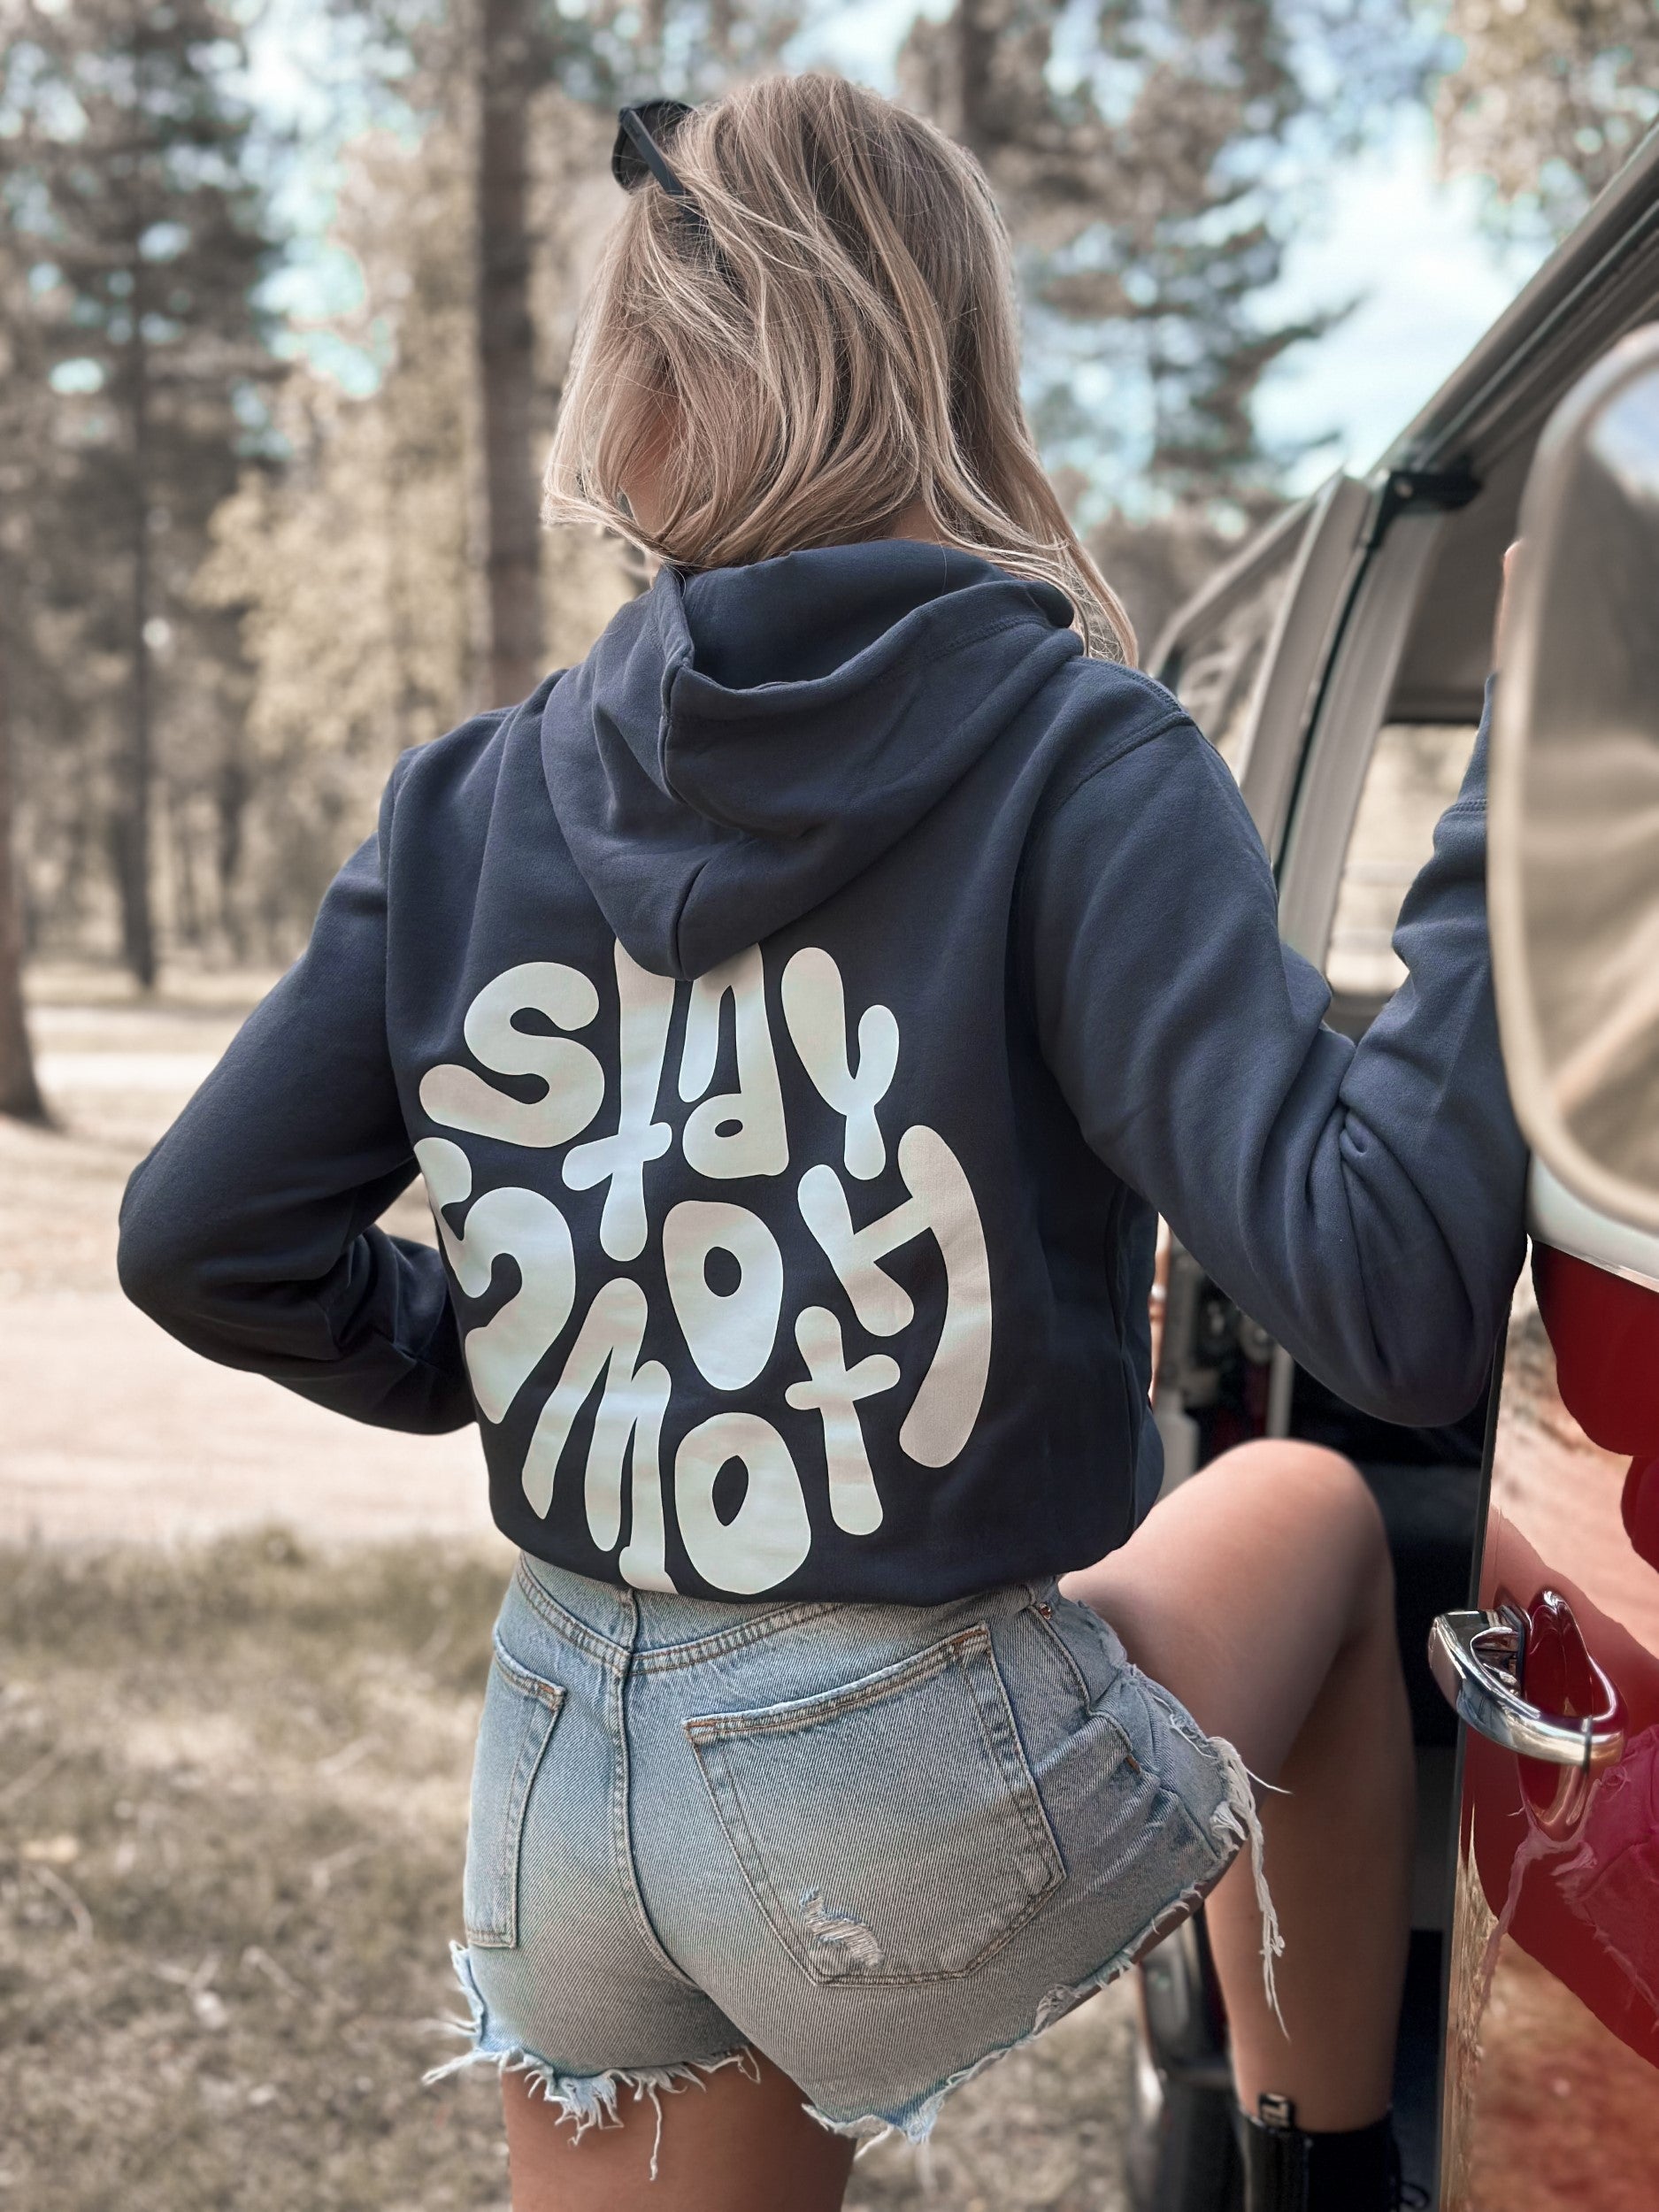 Ink Blue Hoodie / Stay Smooth White Front+Back Women